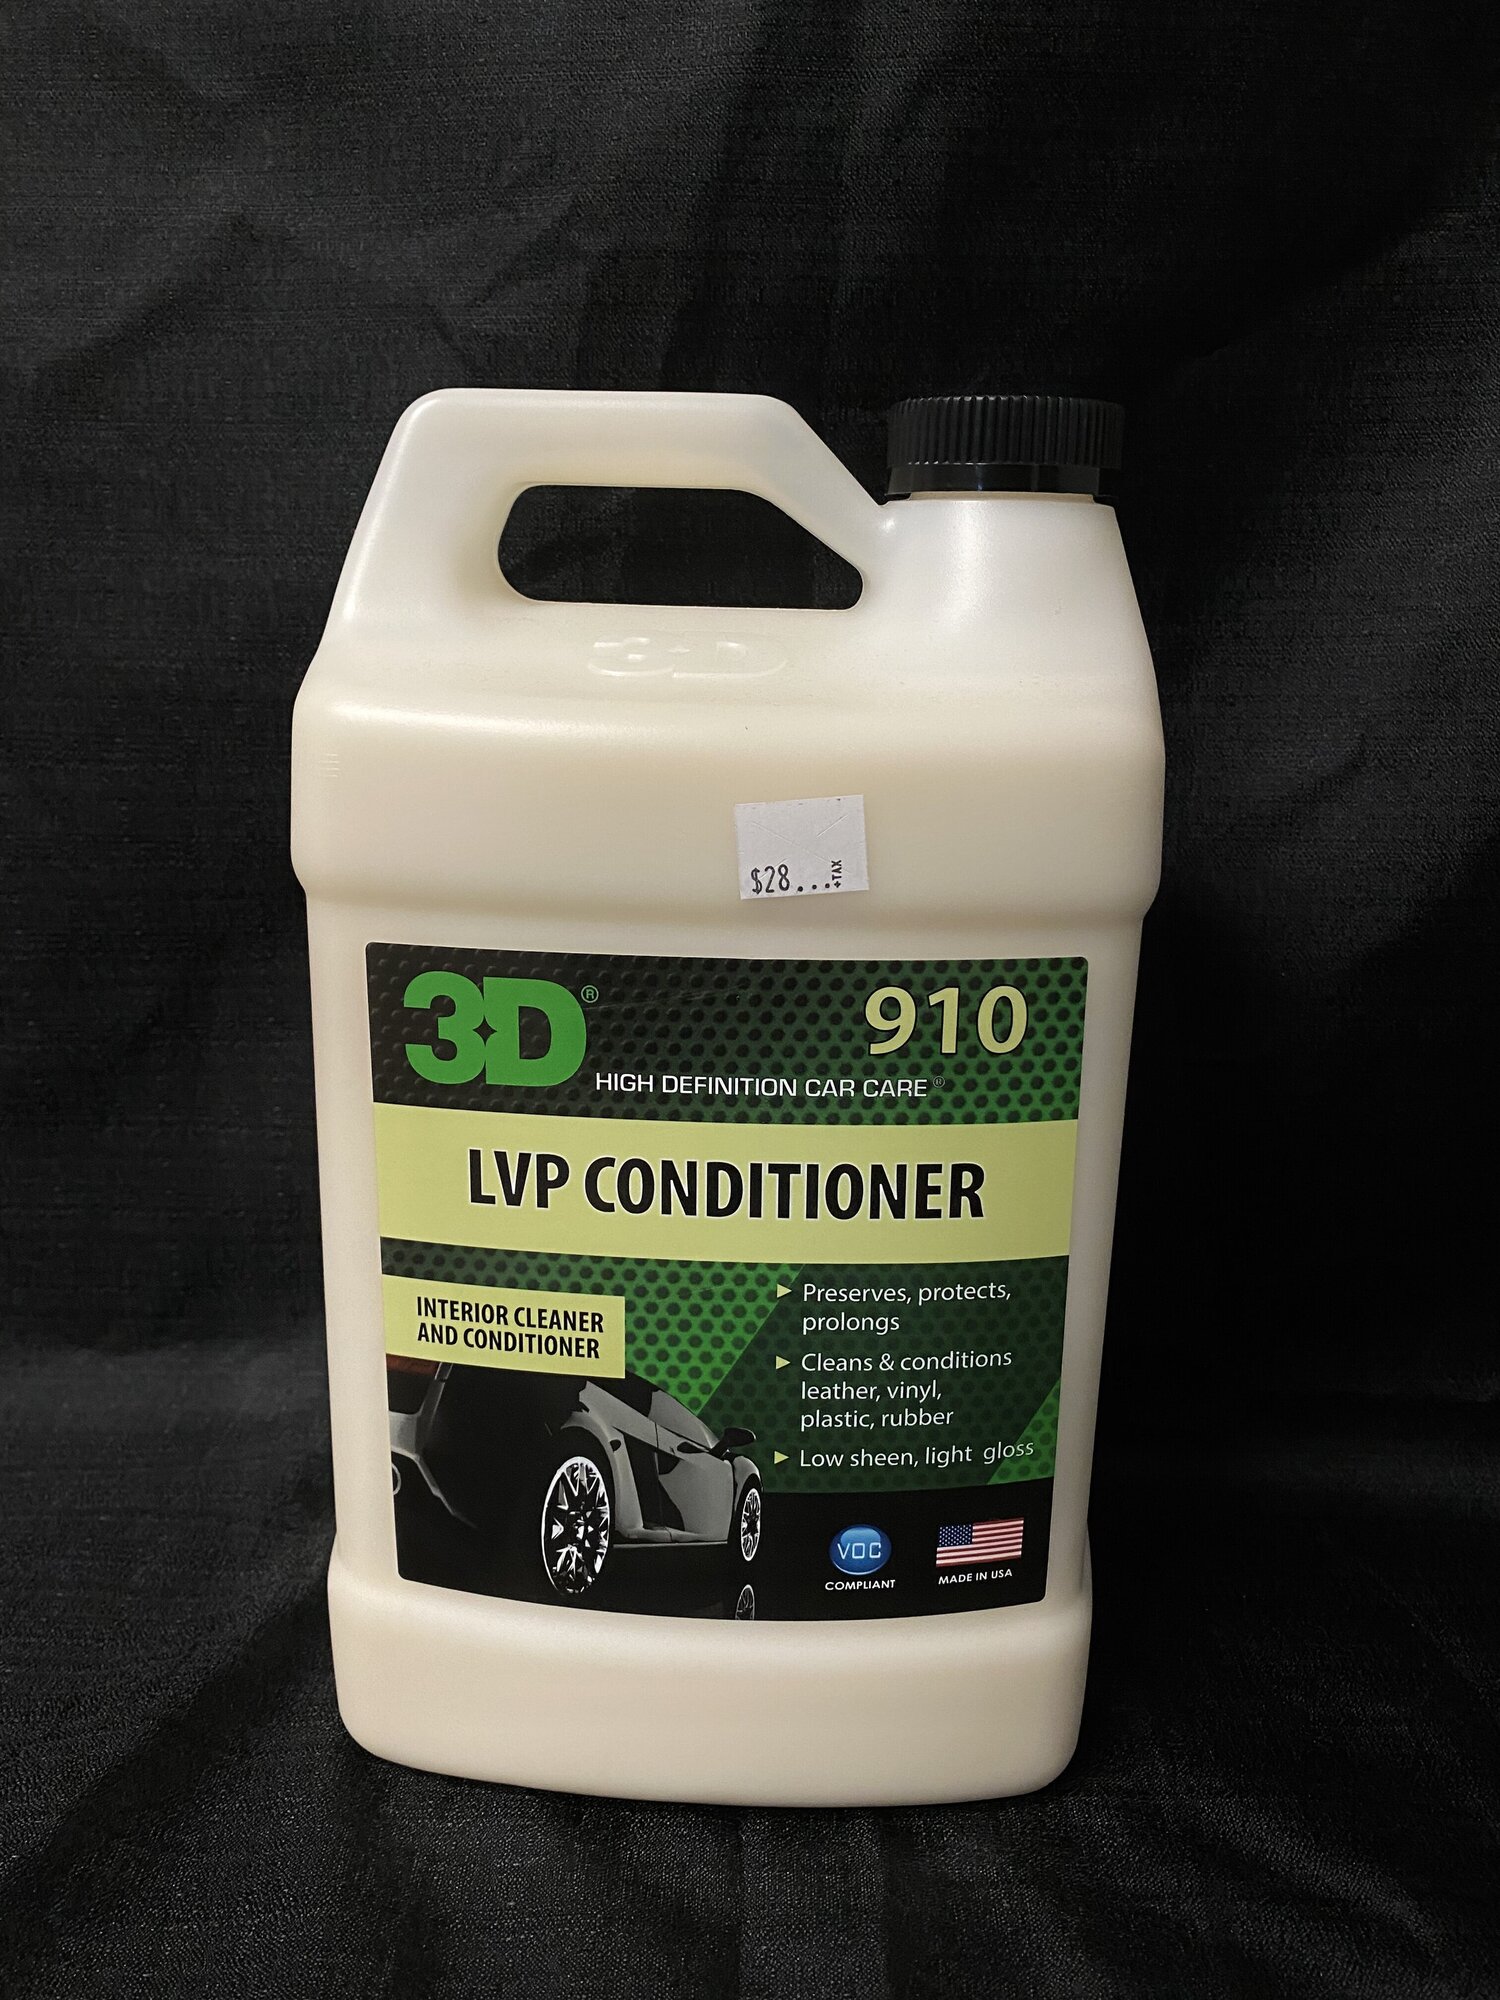 LVP CONDITIONER is for leather vinyl and plastic care and cleaning